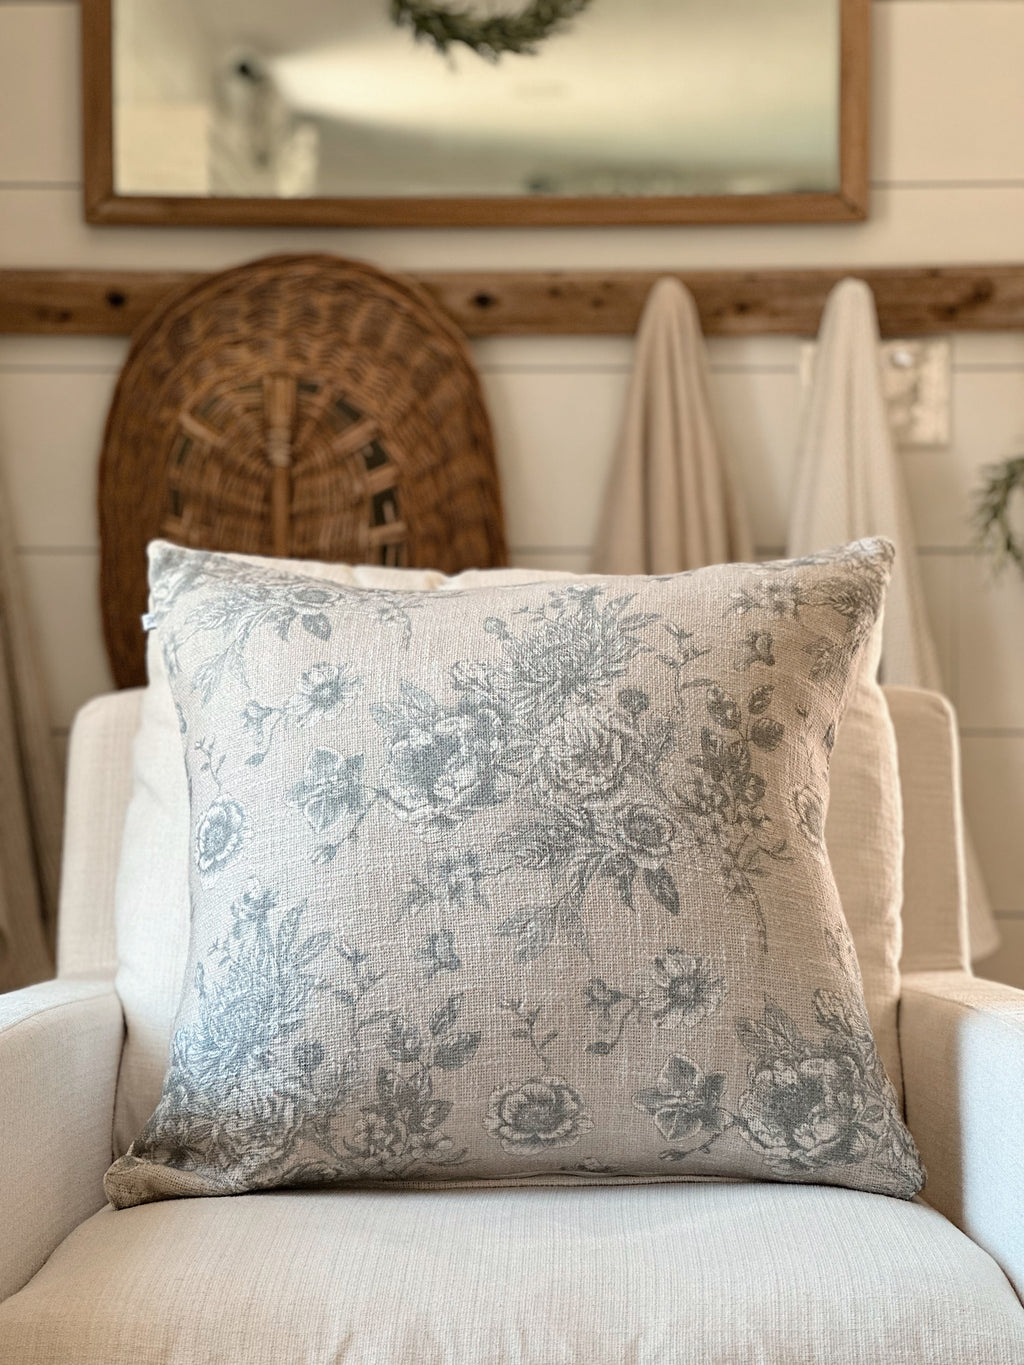 Serenity Toile de Jouy Roses Pillow Cover in Oyster